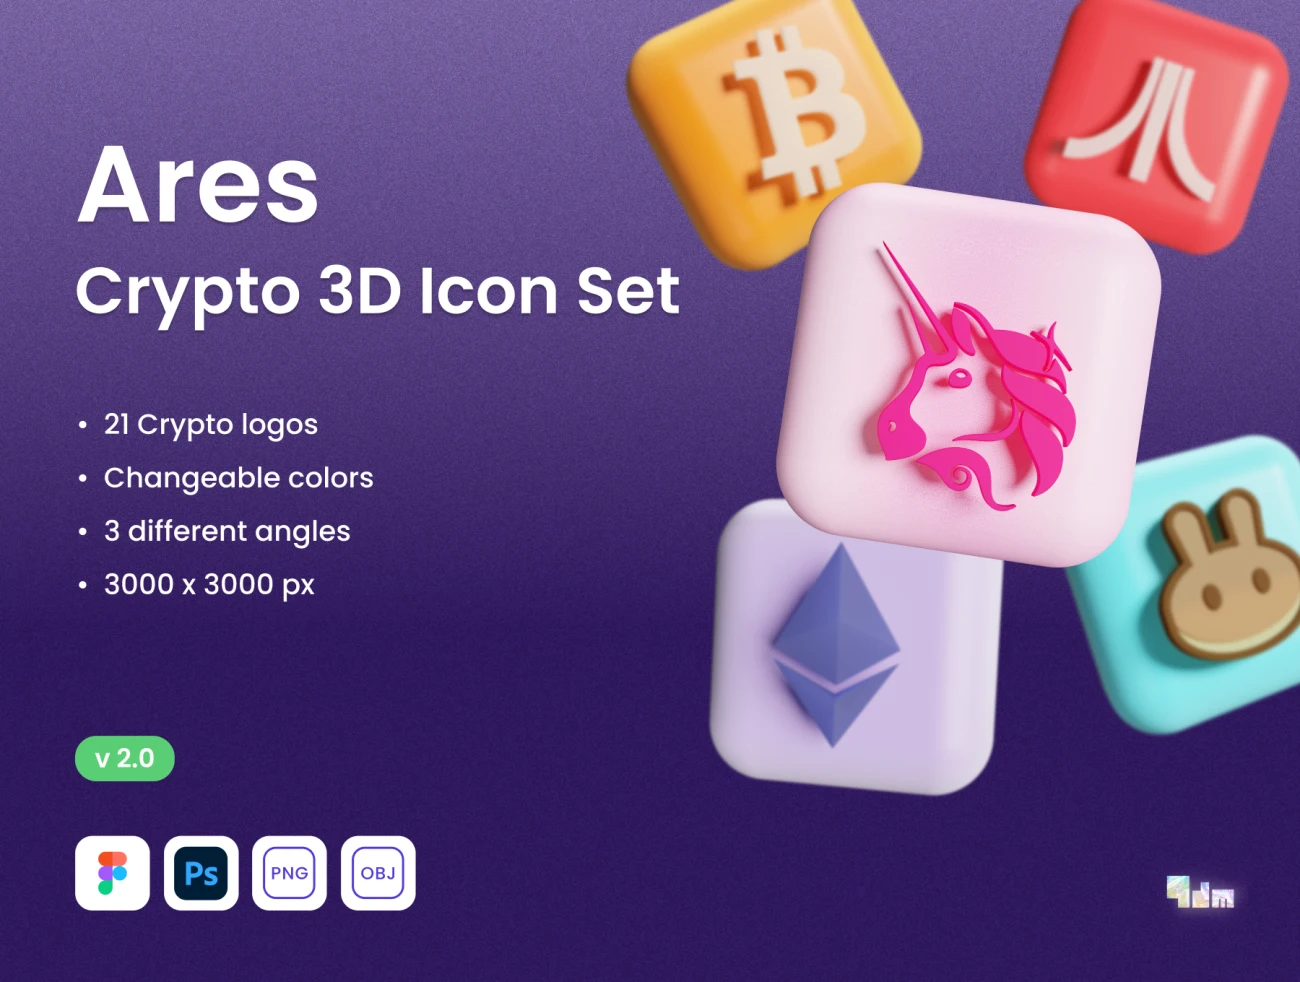 3D 加密货币图标png版 Ares Vol. 2 – Crypto 3D Icon Set-PNG .png插图1